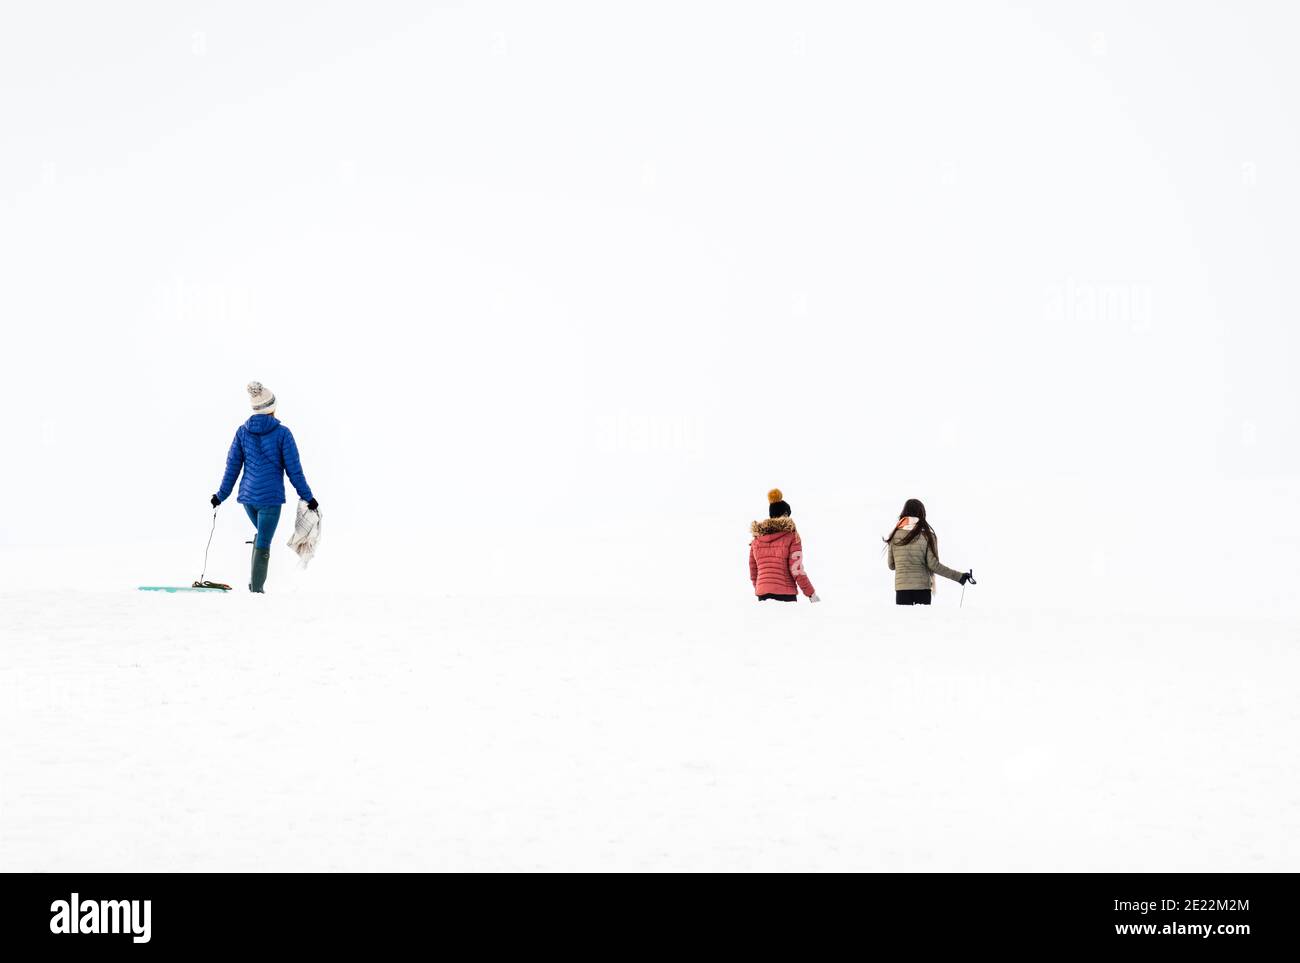 Winter outdoor fun,  activities and exercise.  Families with children out sledging in deep snow. Stock Photo